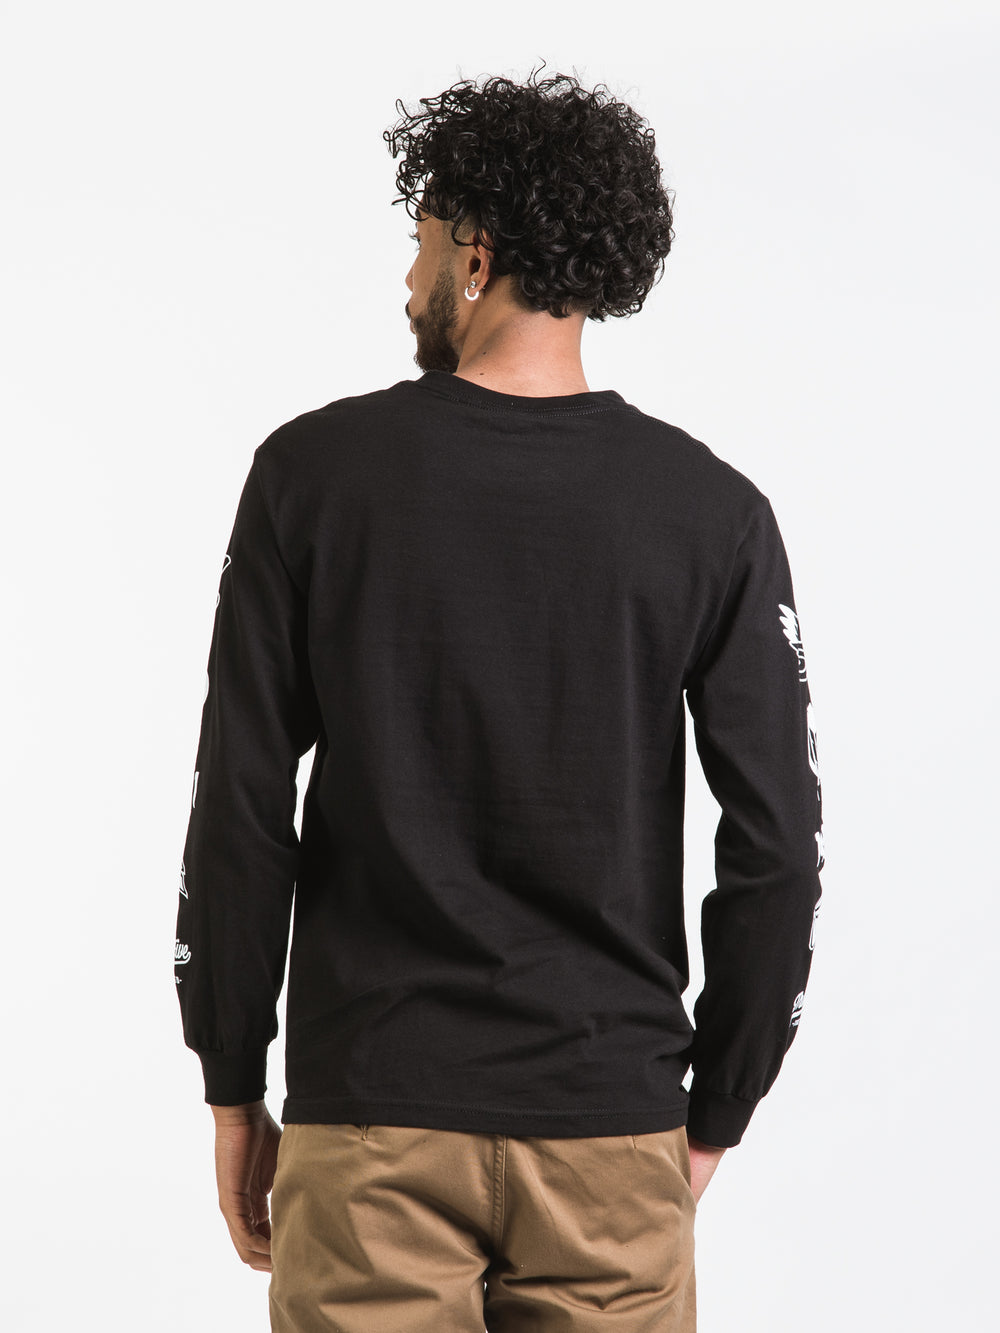 SECTION 35 GOAT LONG SLEEVE TEE  - CLEARANCE